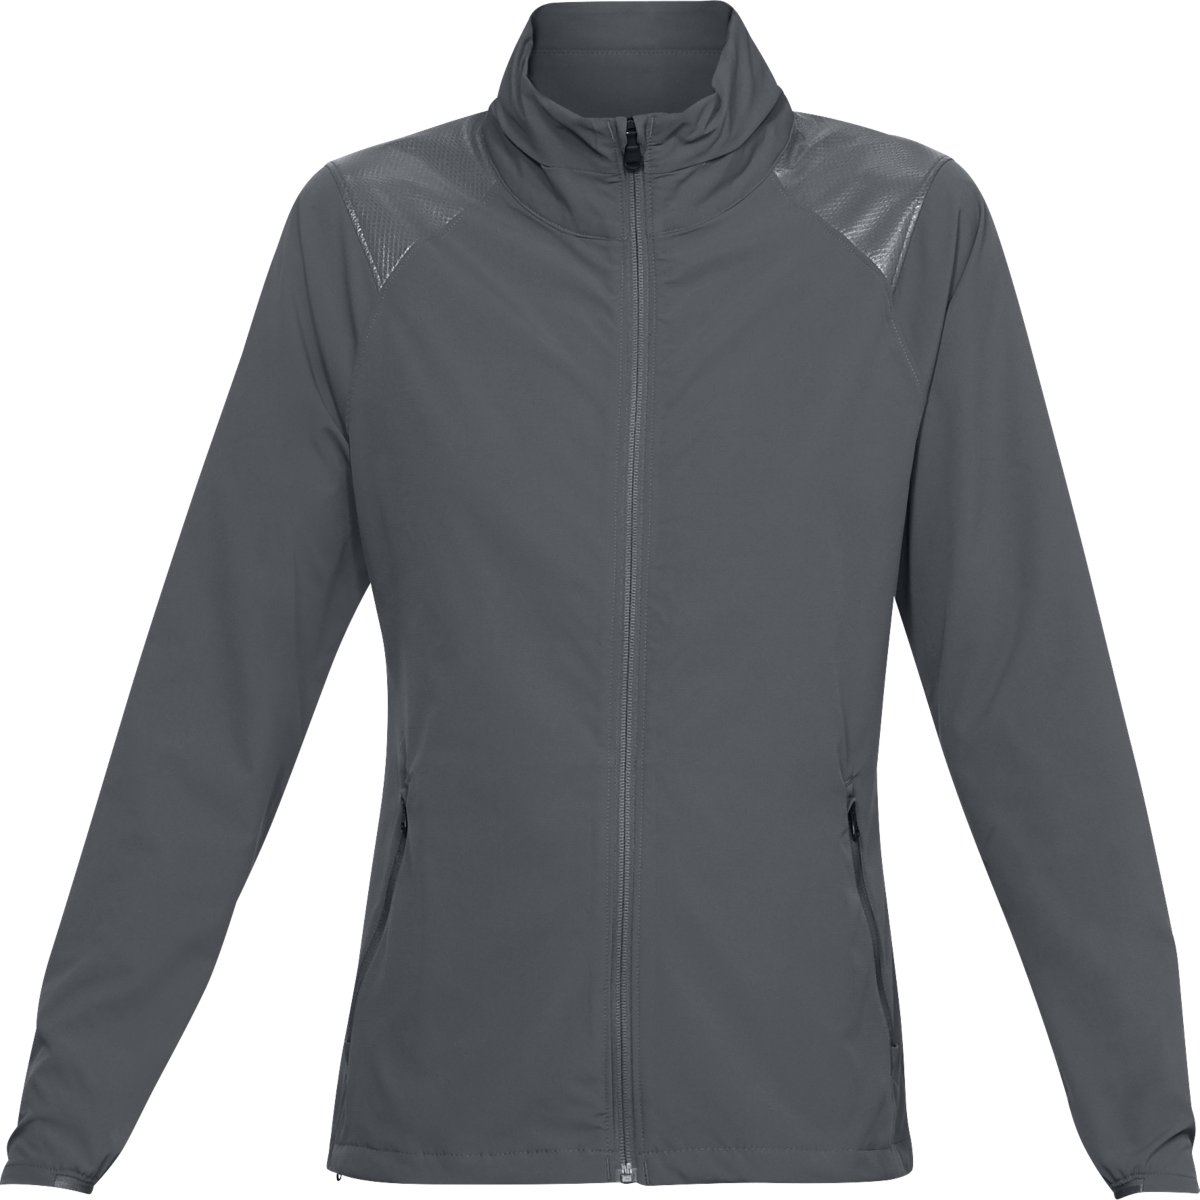 Under Armour Storm Windstrike Full Zip Pitch Gray – M